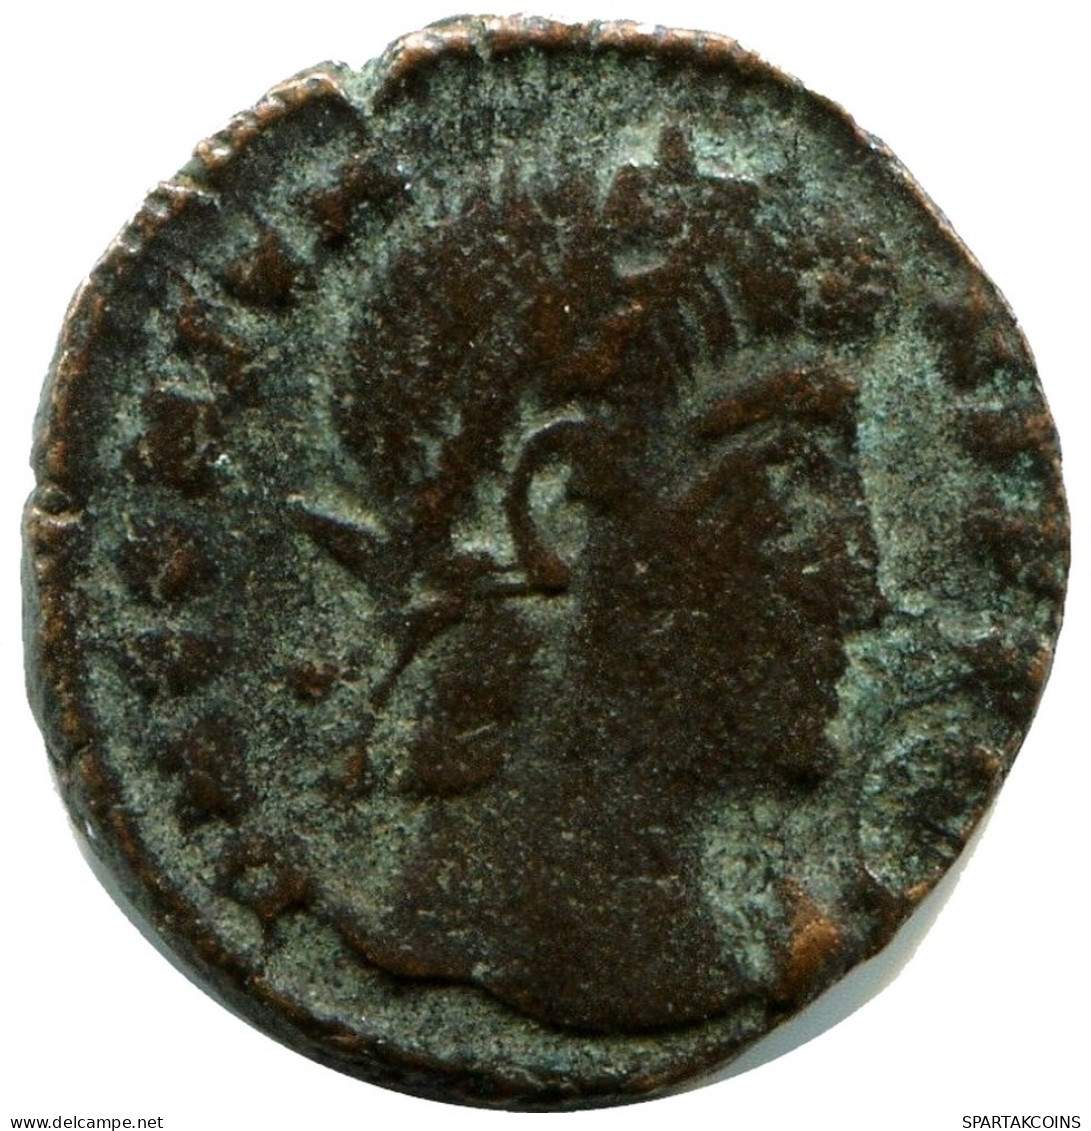 CONSTANS MINTED IN CYZICUS FROM THE ROYAL ONTARIO MUSEUM #ANC11692.14.U.A - El Imperio Christiano (307 / 363)